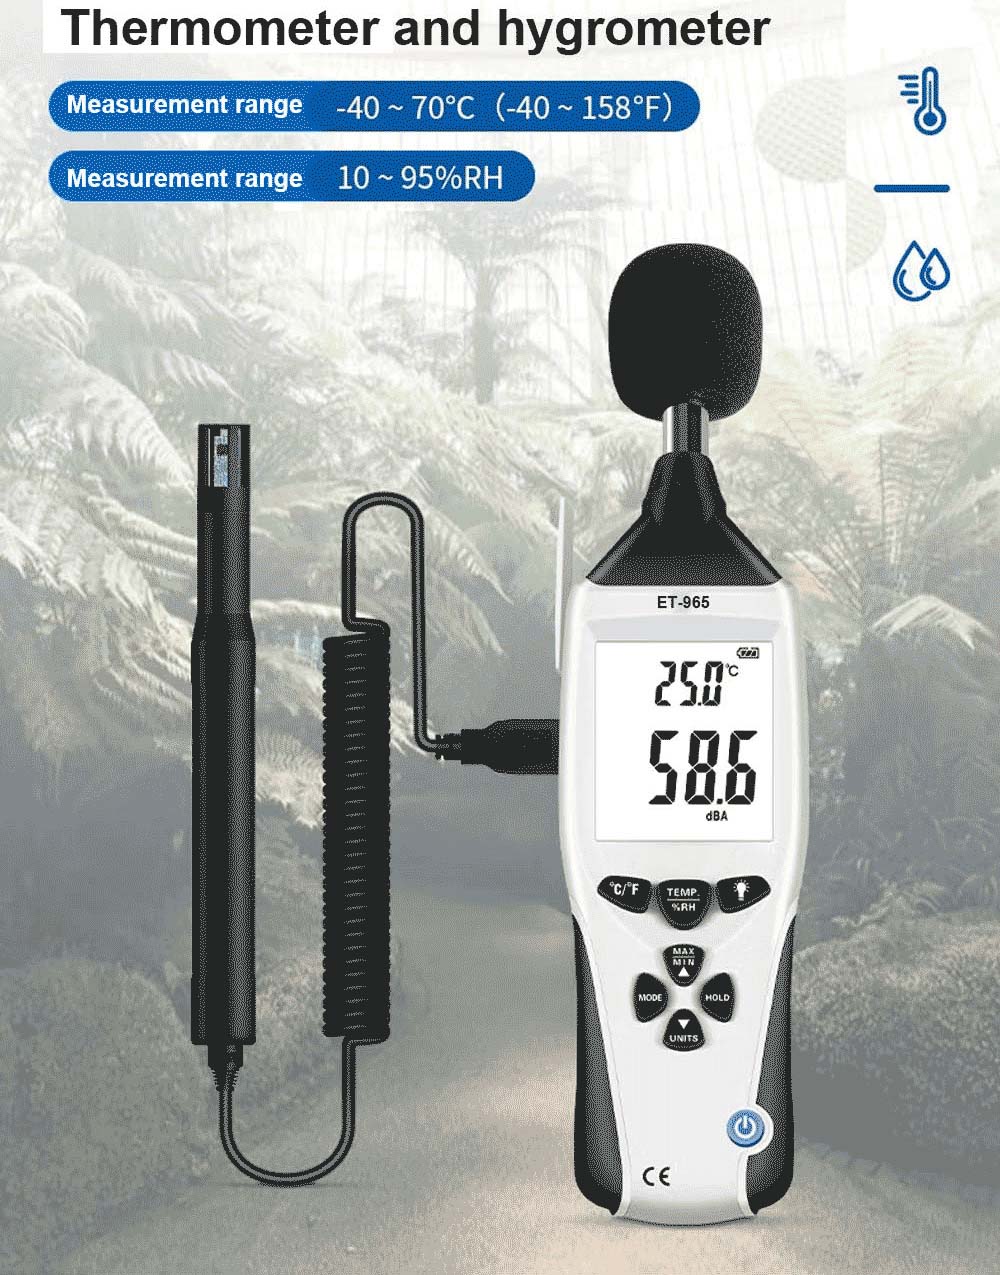 ET-965 5 in 1 Multifunction Environment Meter with Sound Level Meter, Light Meter, Humidity, and Temperature Fuction 2